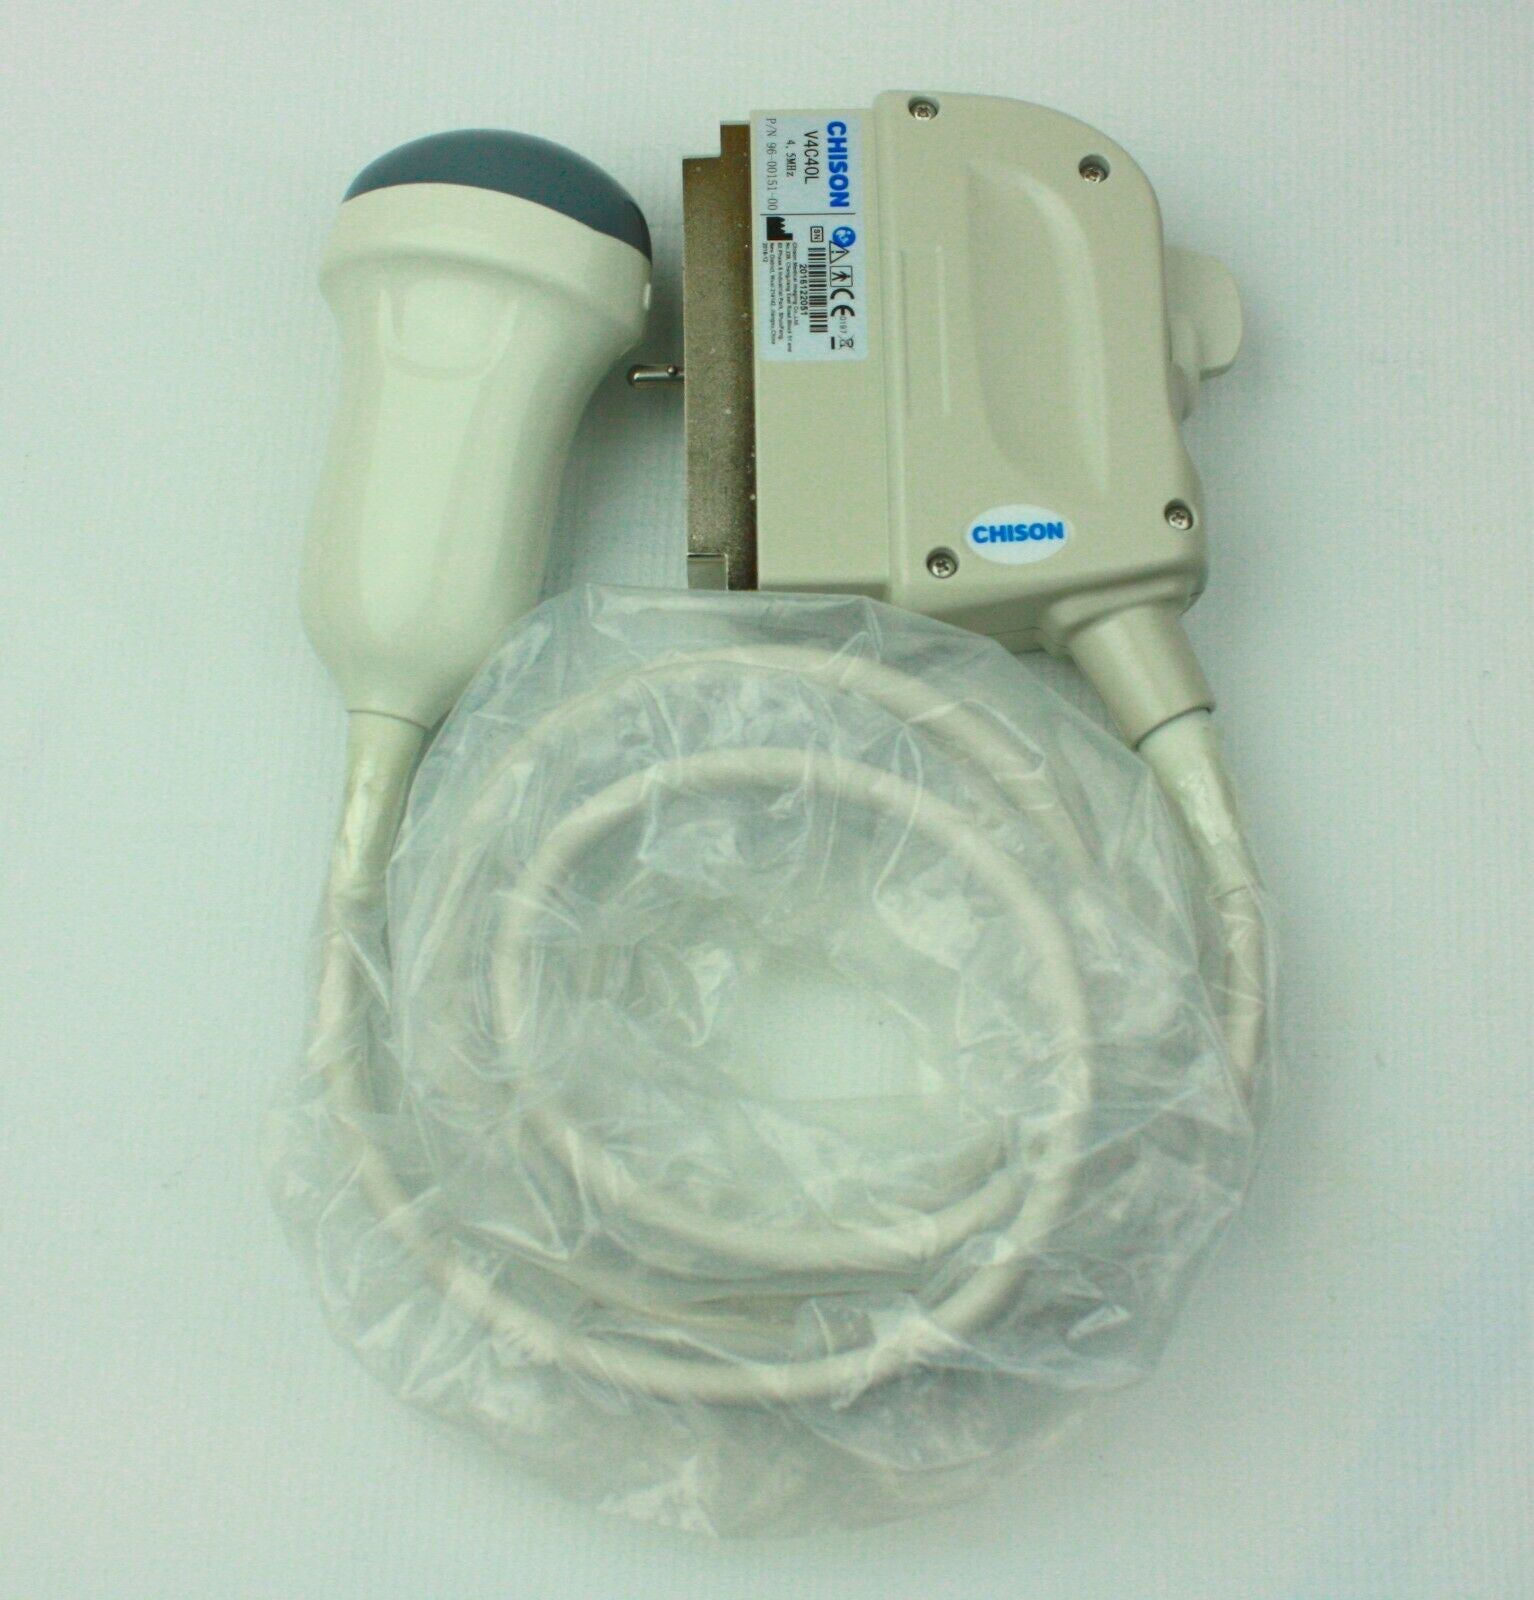 NEW CHISON V4C40L 4D VOLUMETRIC PROBE ,TRANSDUCER COMPATIBLE WITH Q SERIES DIAGNOSTIC ULTRASOUND MACHINES FOR SALE